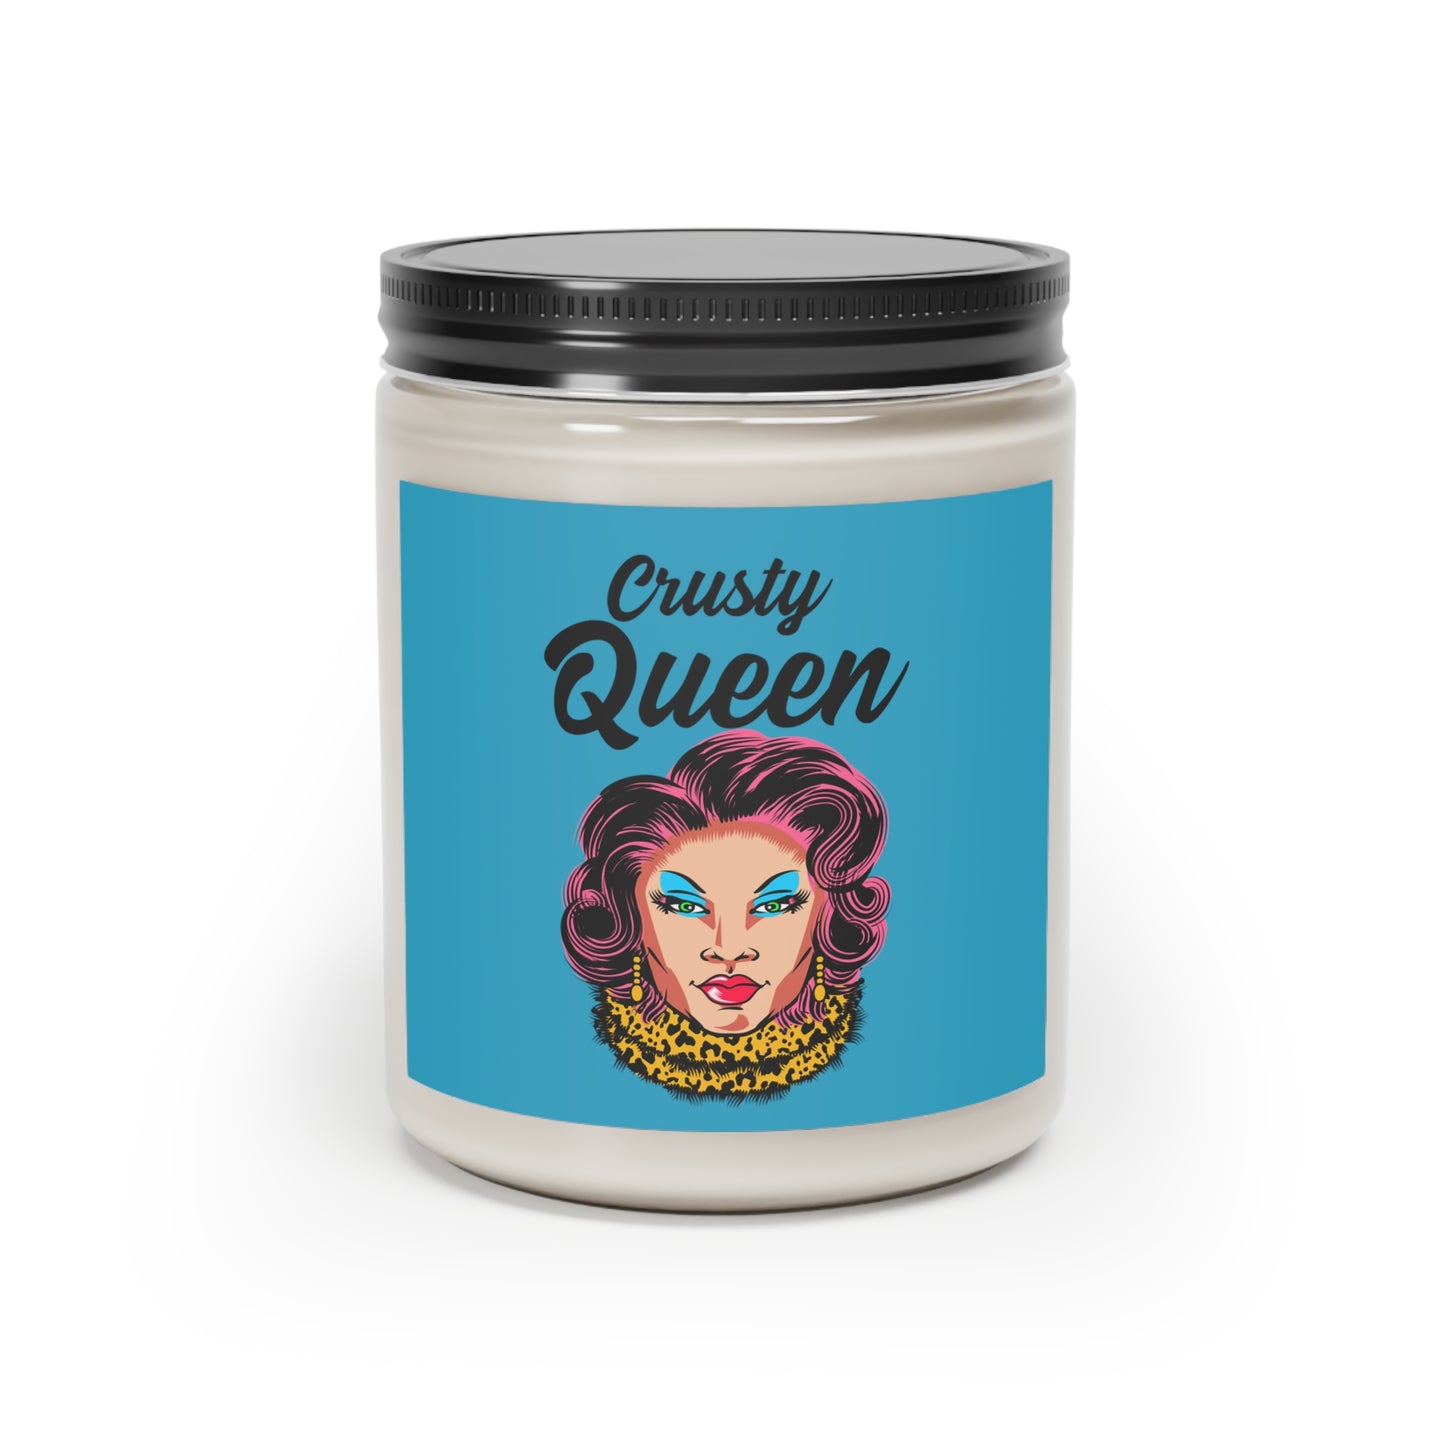 Crusty Queen Scented Candle